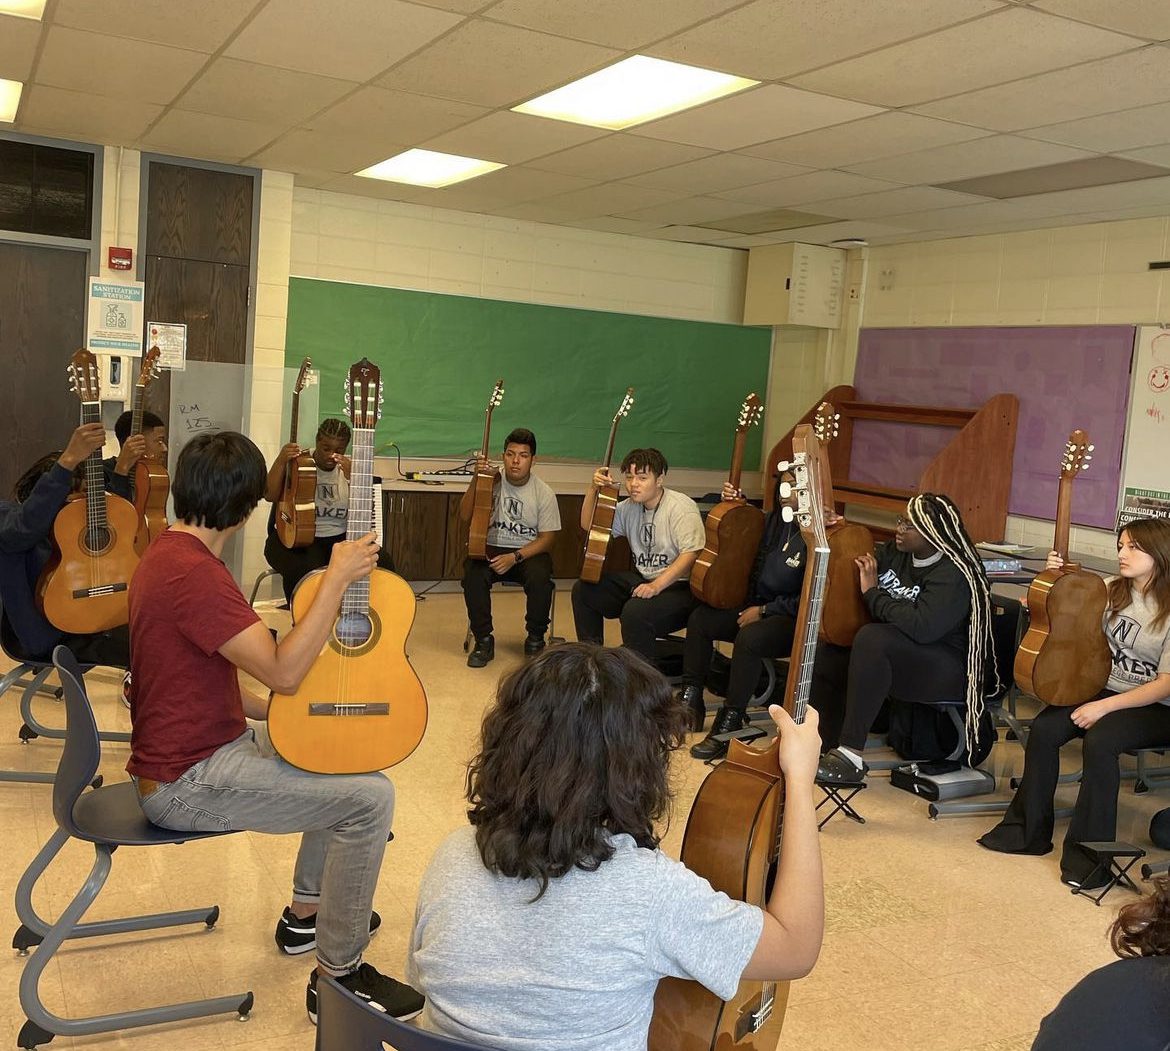 Students are sat in their chairs in a circle. The students are wearing their Baker school graphic tee. The instructor is wearing a read shirt and gray dress pants. The students and instructor are holding their guitar upright on top of their knees.